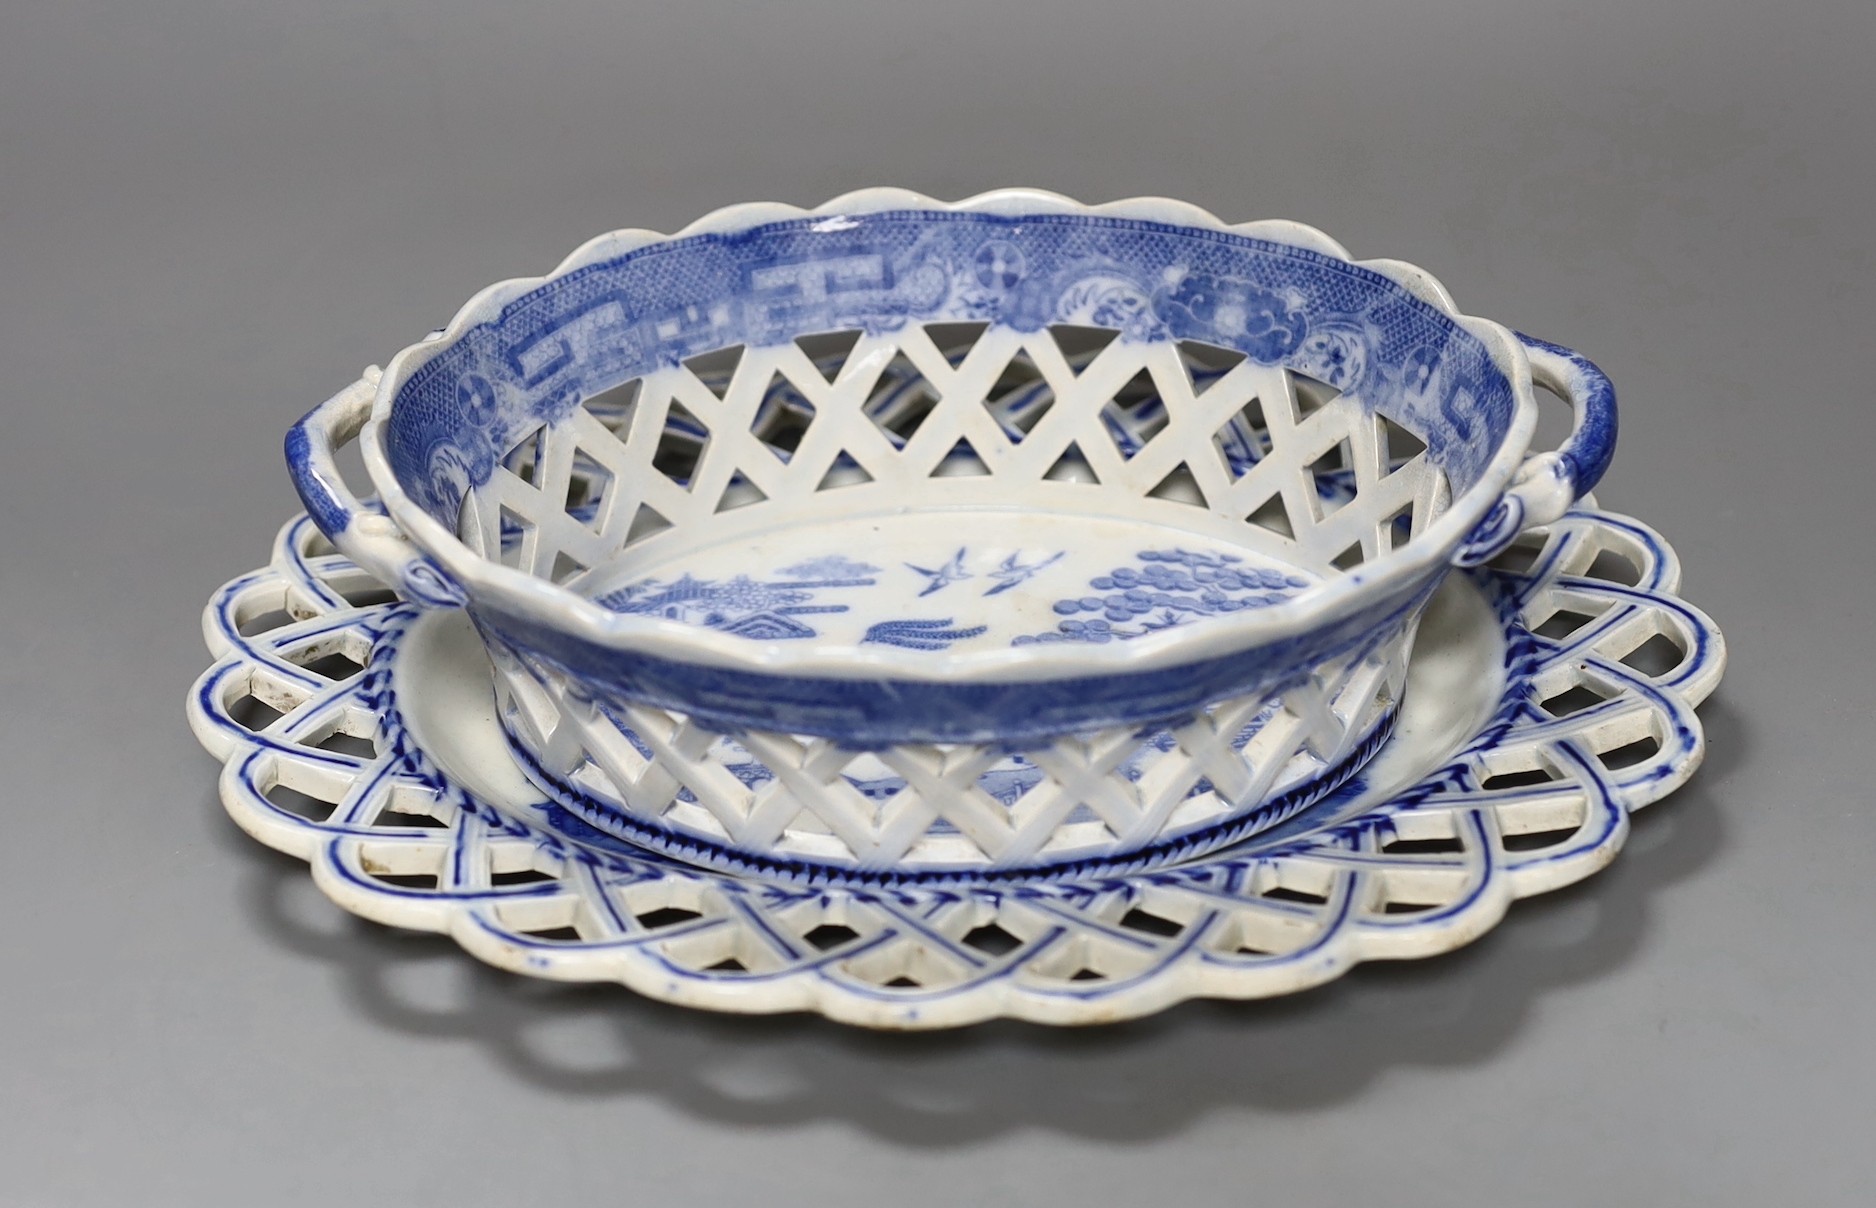 An early 19th century English blue and white pearl ware oval two handled chestnut reticulated basket with transfer printed chinoiserie decoration, together with a similar oval stand